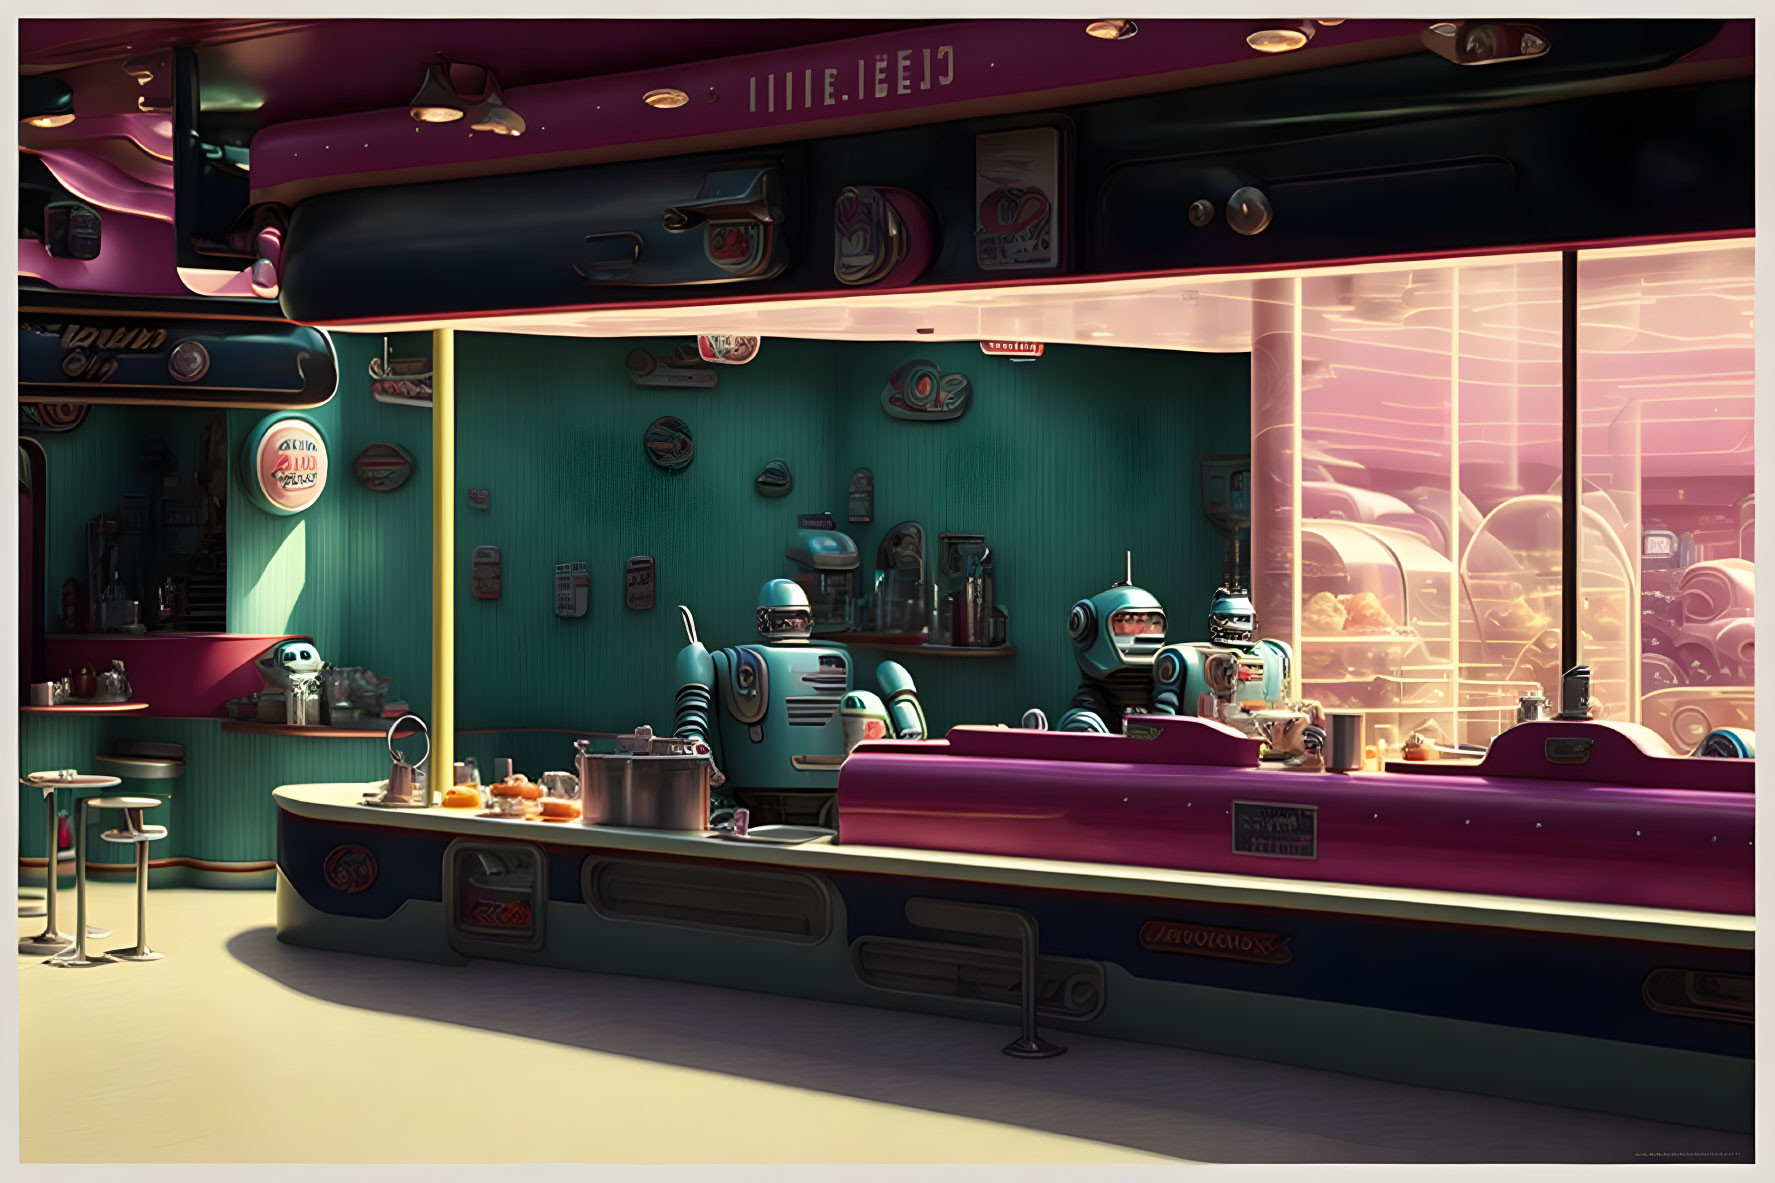 Vintage-inspired diner with robot servers, pink & teal decor, pastries on counter